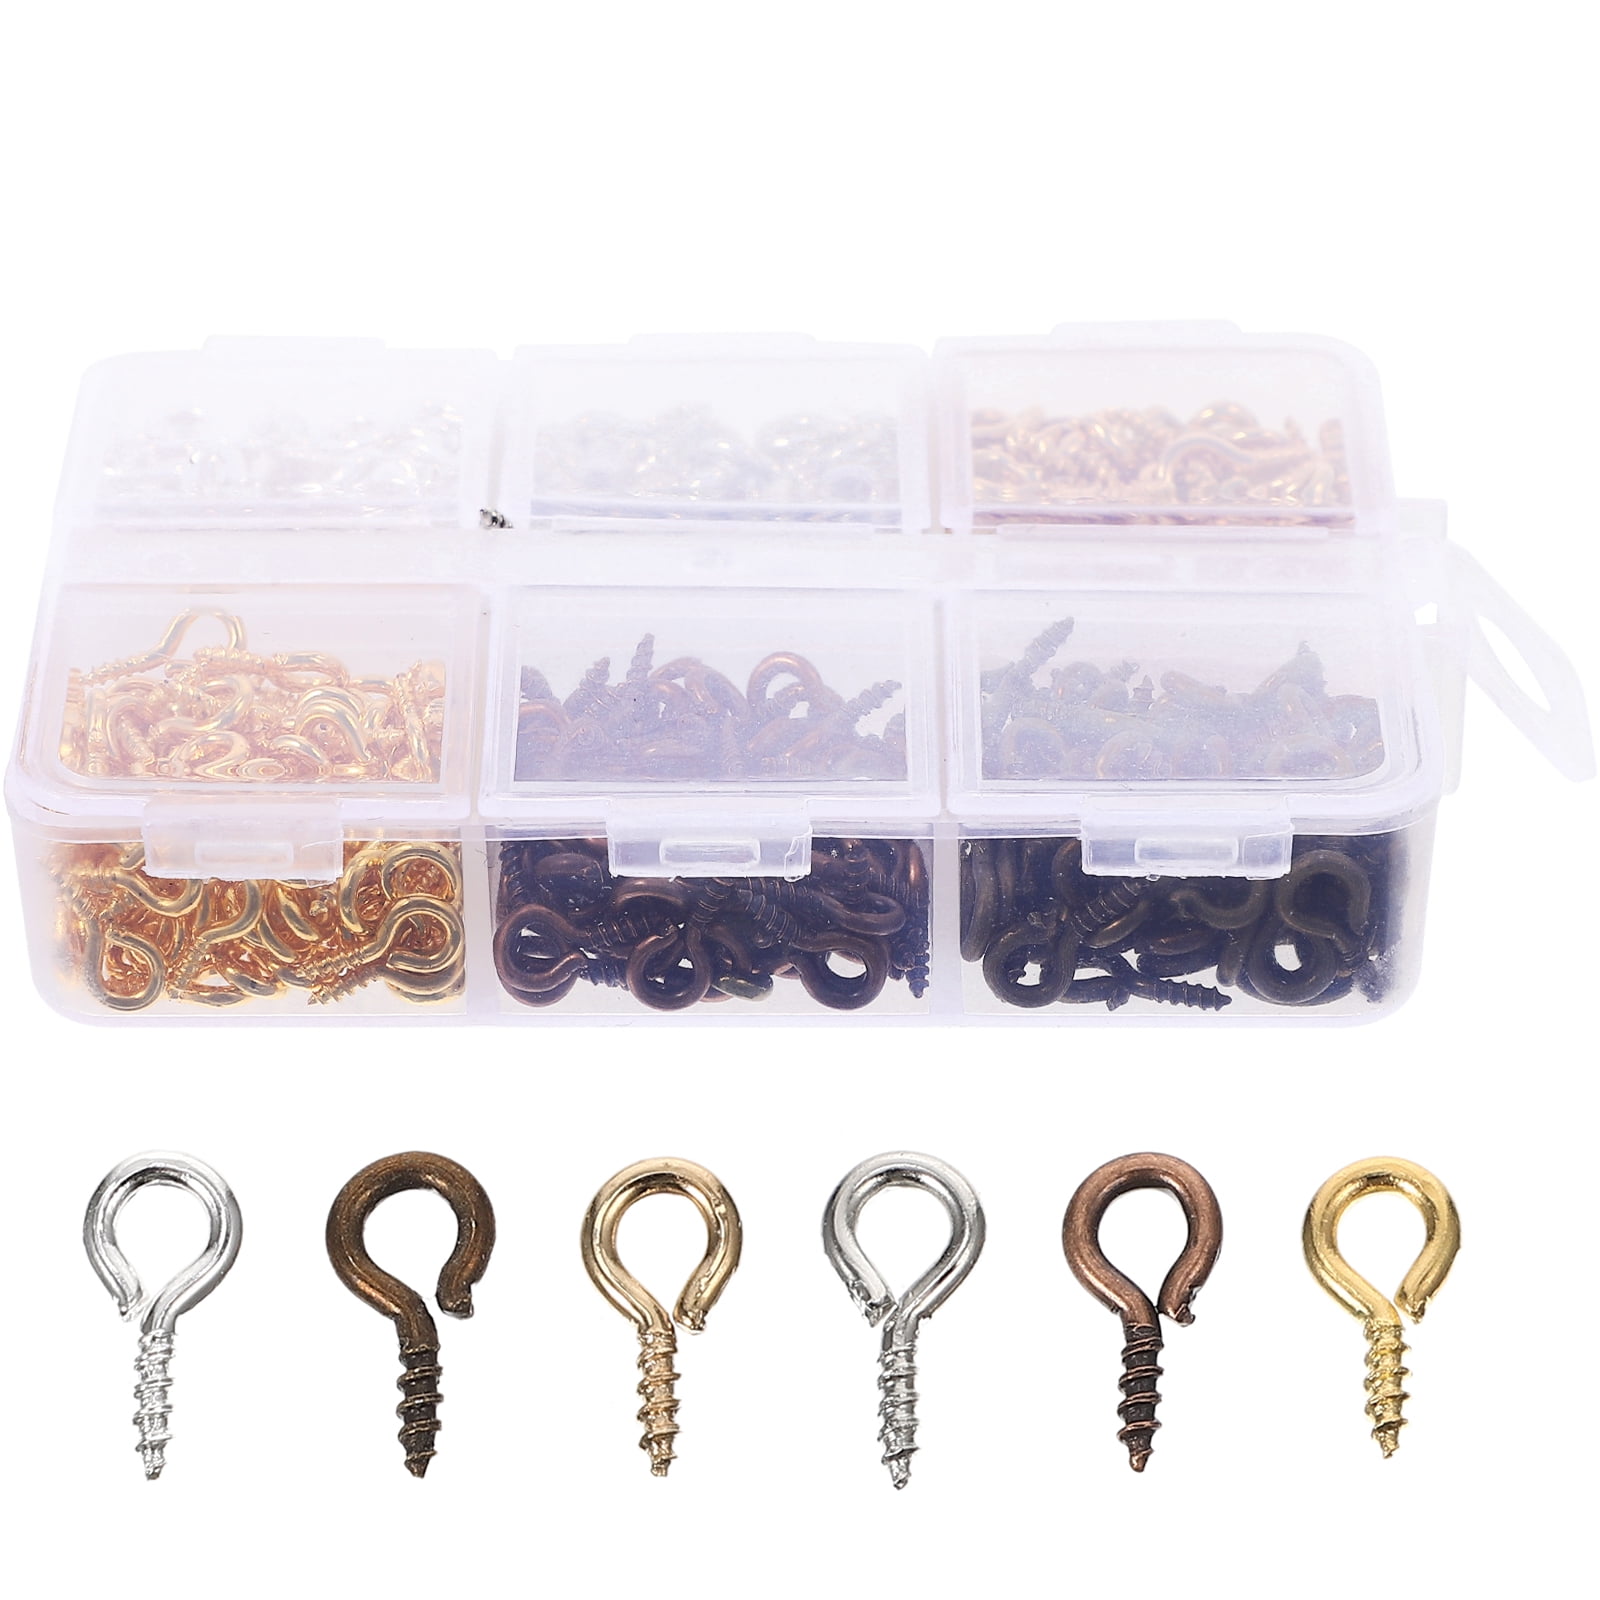 500pcs Iron Open Eye Pins 2.0 Inch DIY Craft Making Eye Pins with Storage  Box Not Easy To Deform or Fracture Head Pins Findings for Earring Pendant  Bracelet Jewelry Necklace Making 